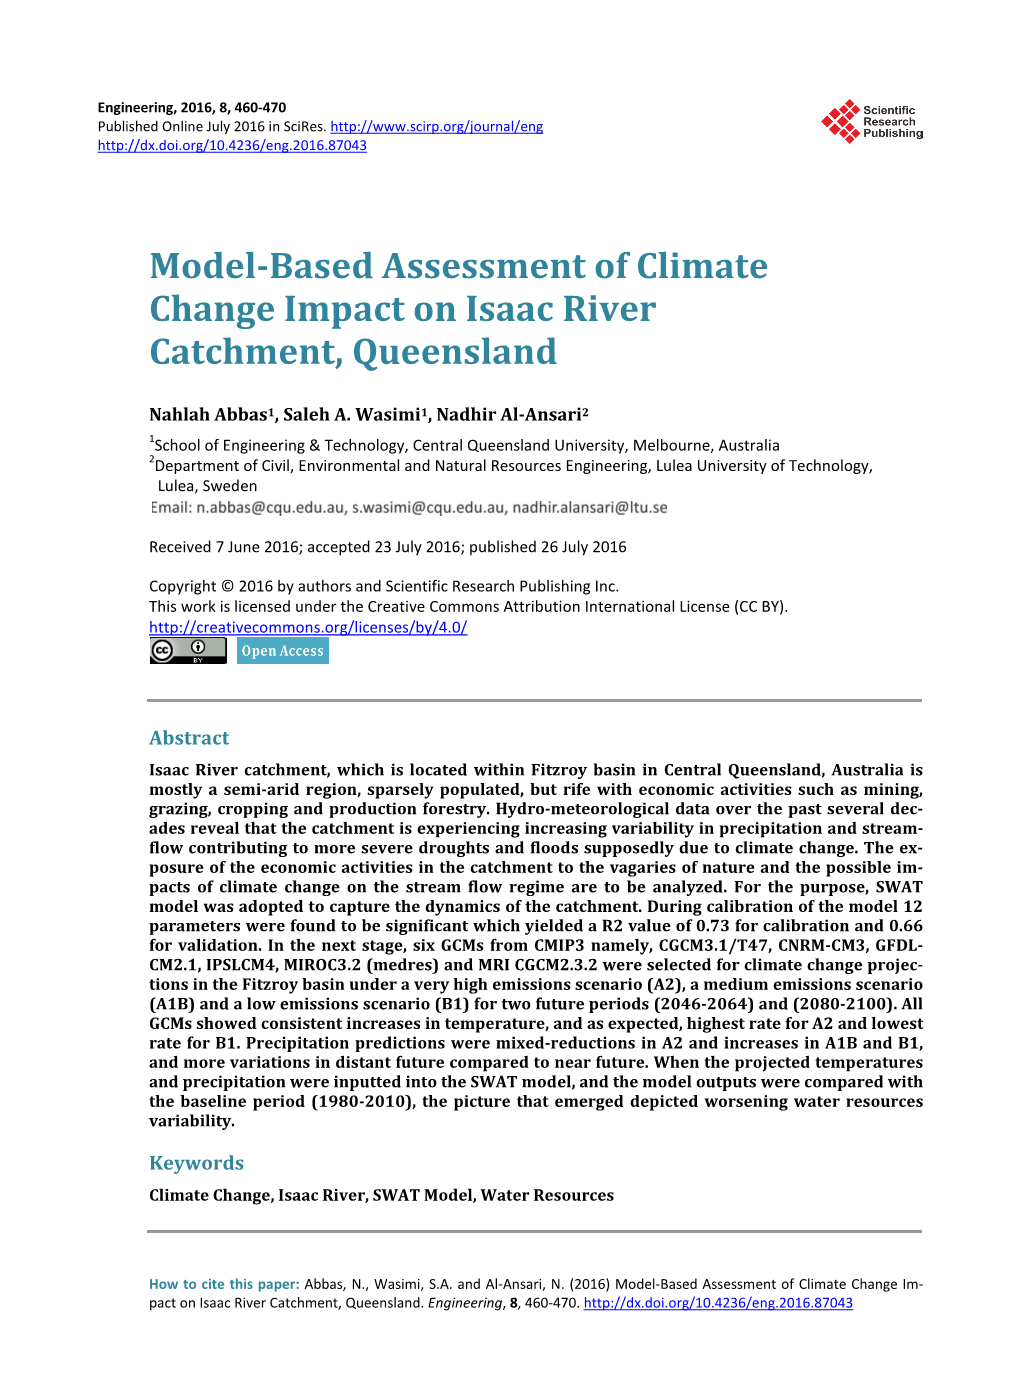 Model-Based Assessment of Climate Change Impact on Isaac River Catchment, Queensland